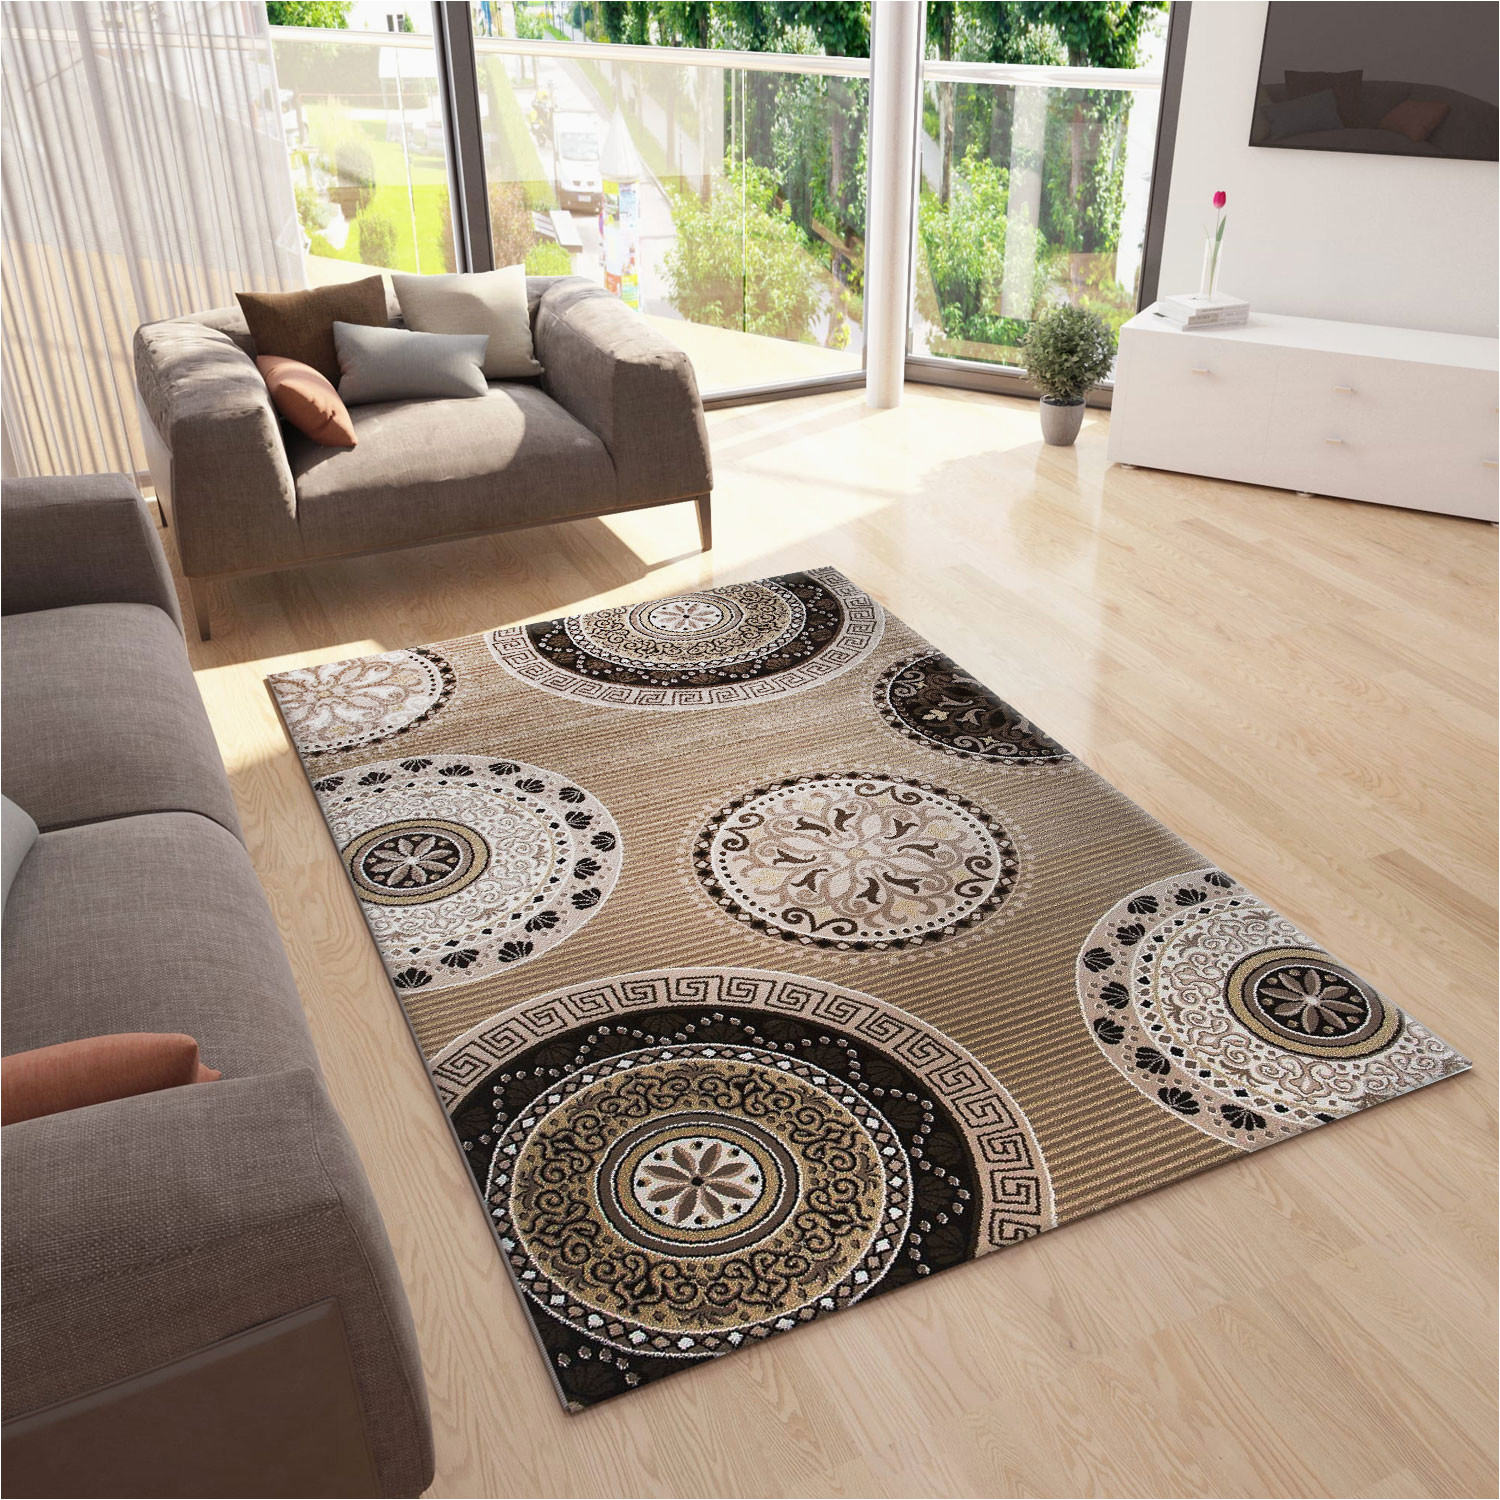 Living Room area Rugs Contemporary Livingroom Rug Contemporary Design Carpet with Circular Patterns and Greek Key Contours Beige Brown P9472 Plentyshop Lts